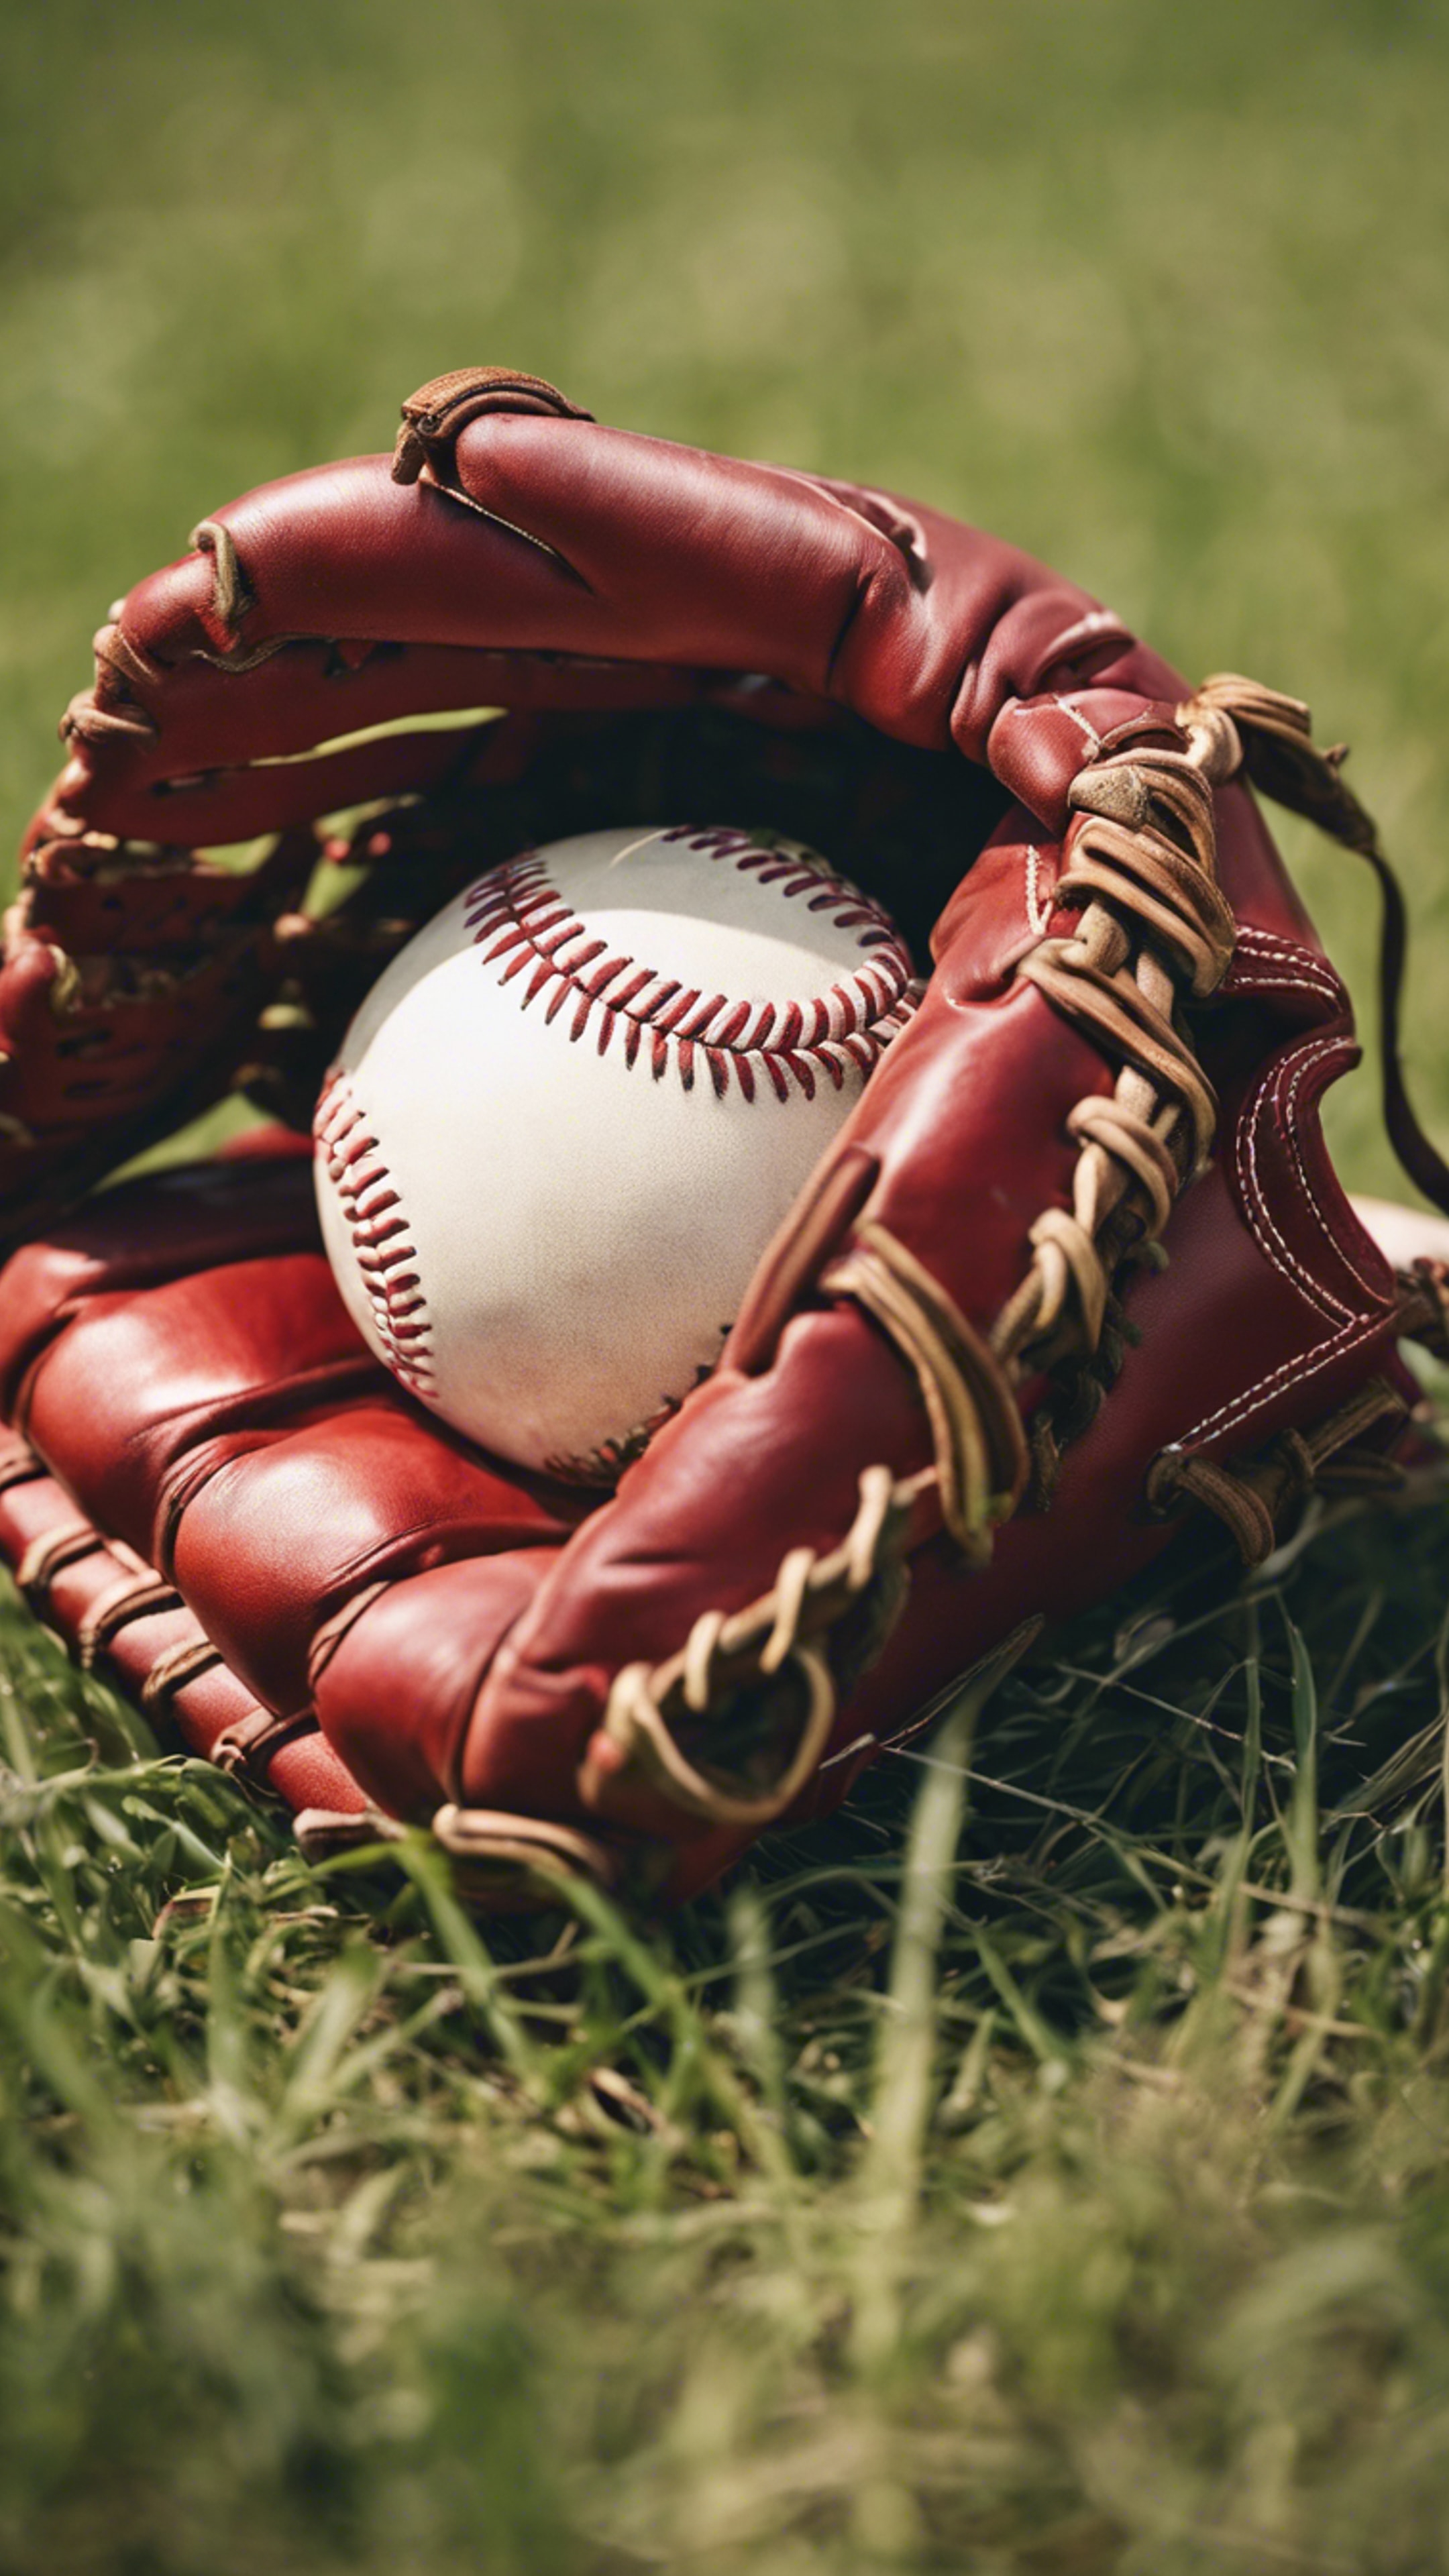 A striking red leather baseball glove on a grassy field right after a game. کاغذ دیواری[10102f7c198241d6b5bd]